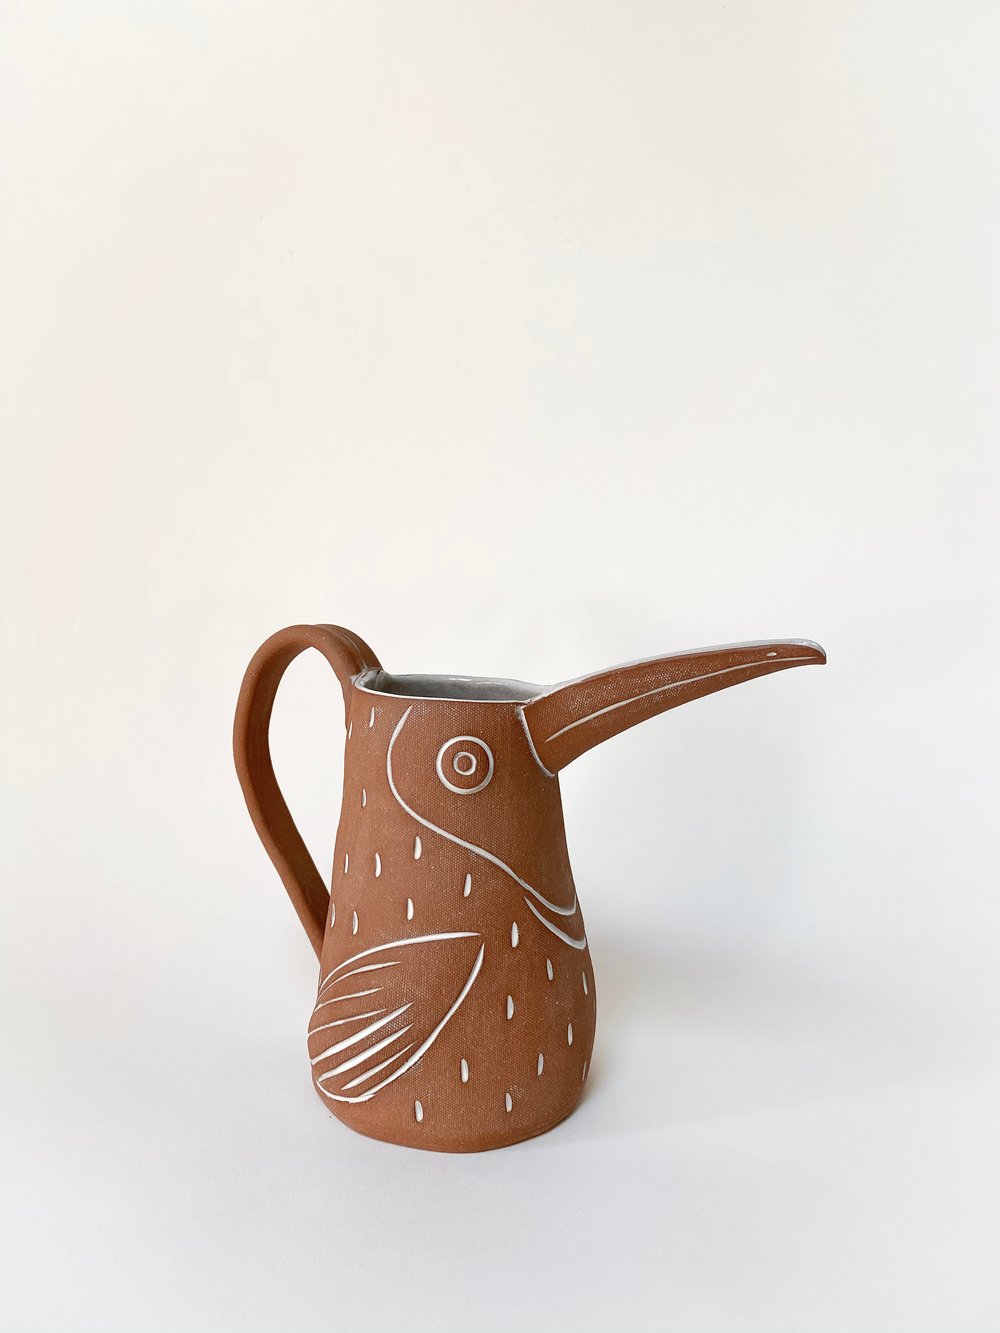 Image of Large Family Size Red Toucan Pitcher